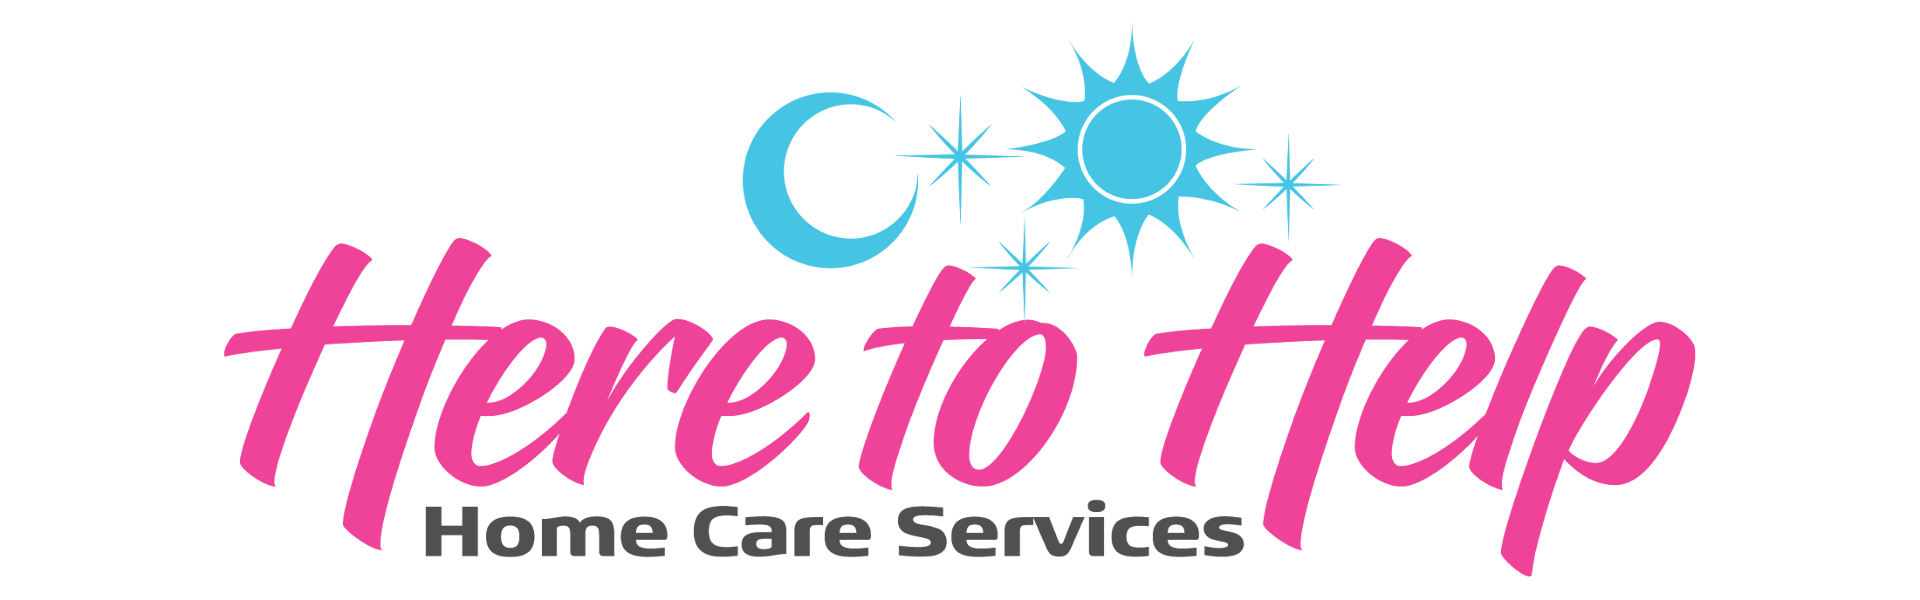 Here to help home care services